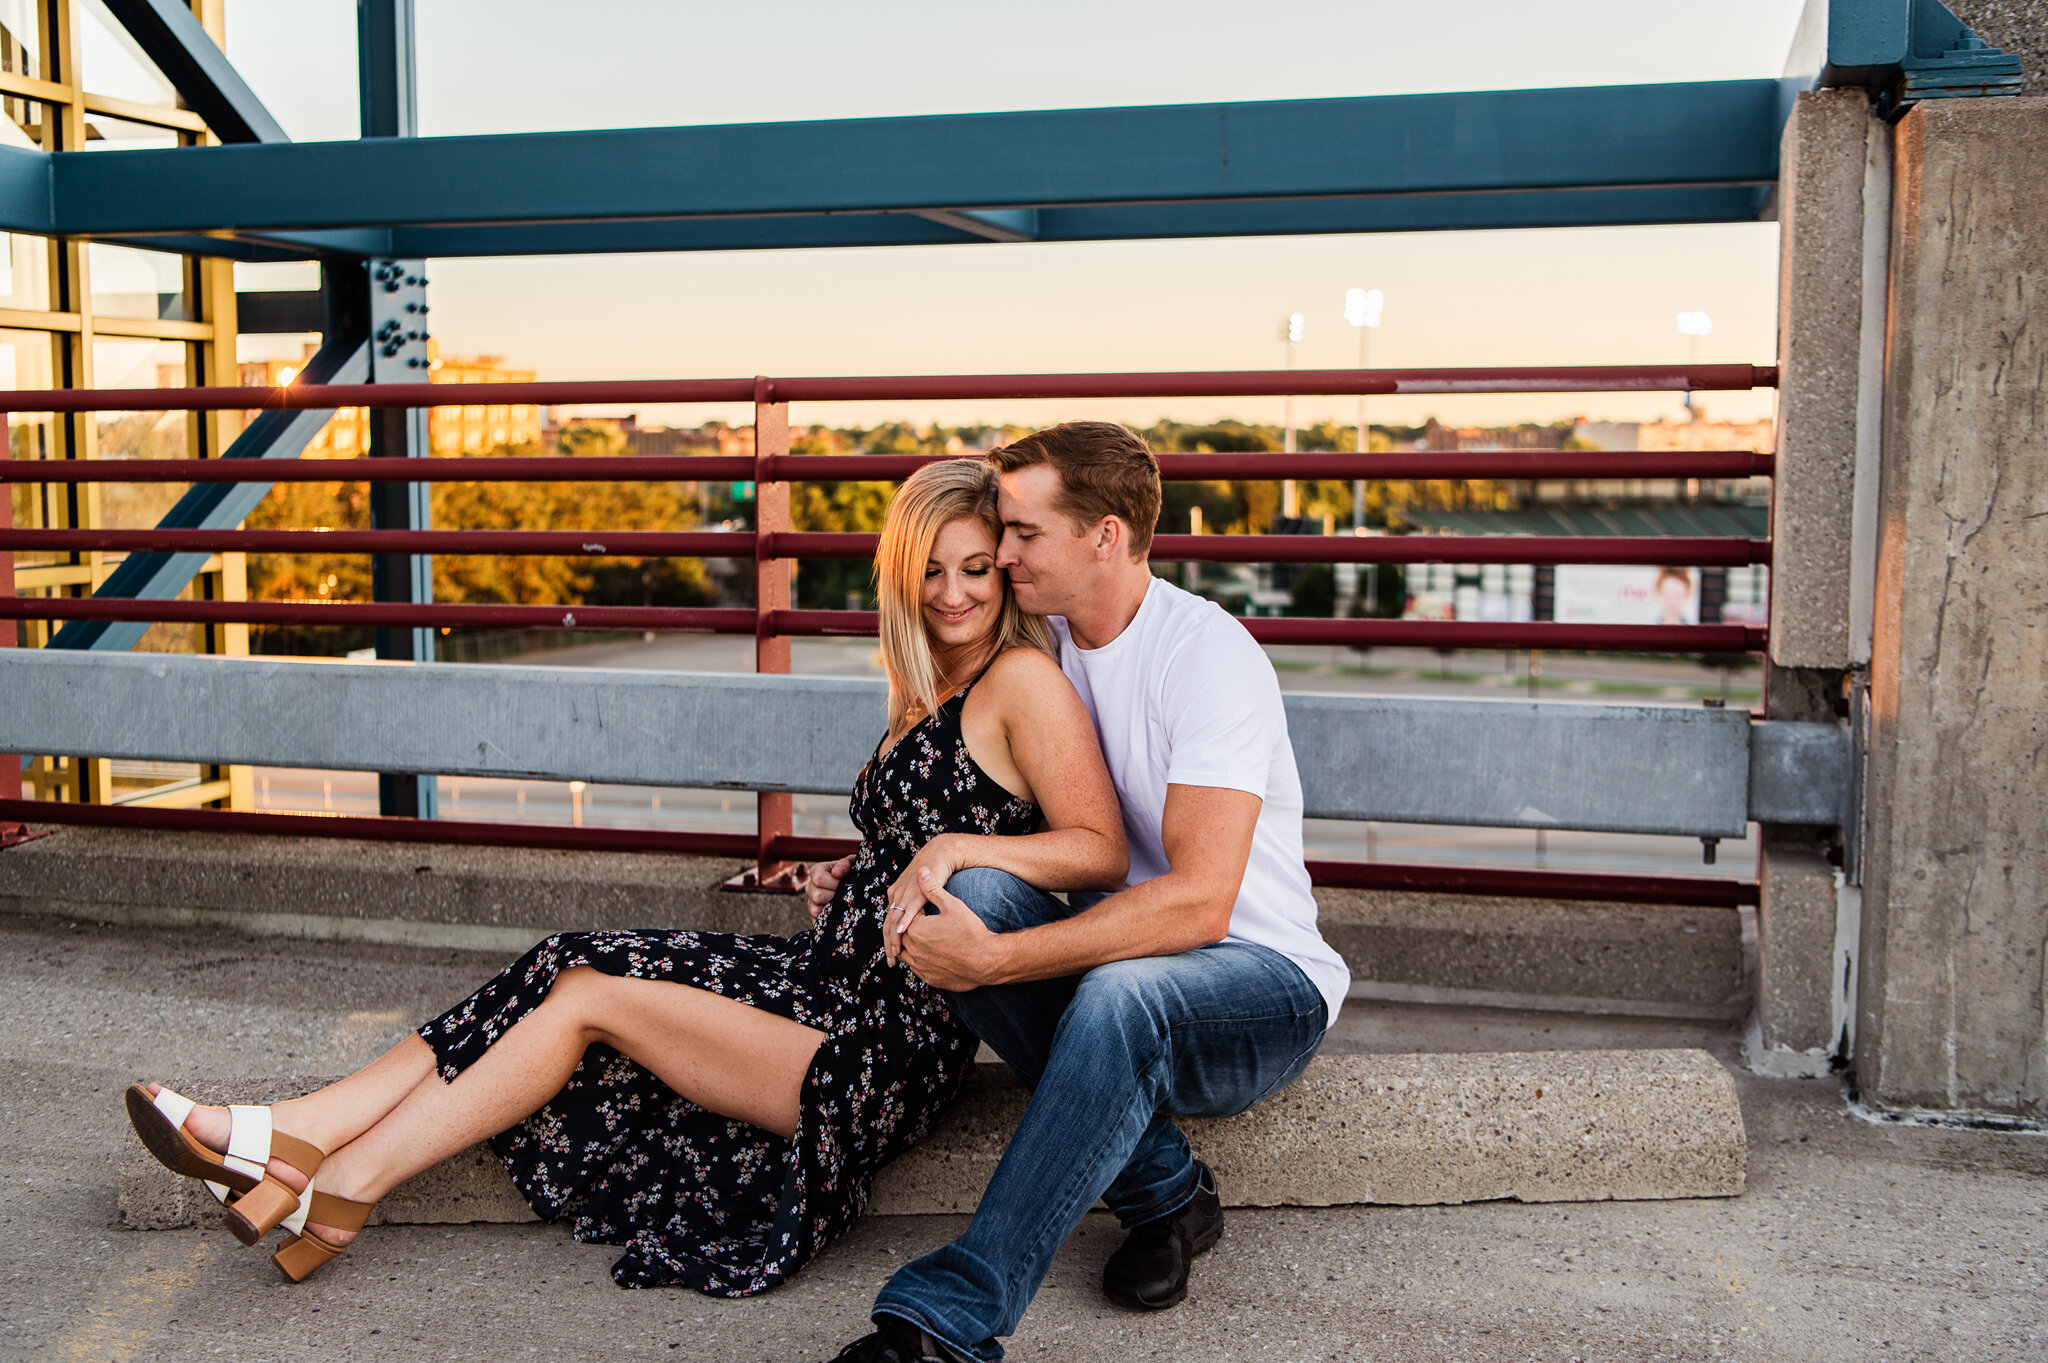 Genesee_Brew_House_High_Falls_Rochester_Engagement_Session_JILL_STUDIO_Rochester_NY_Photographer_5765.jpg